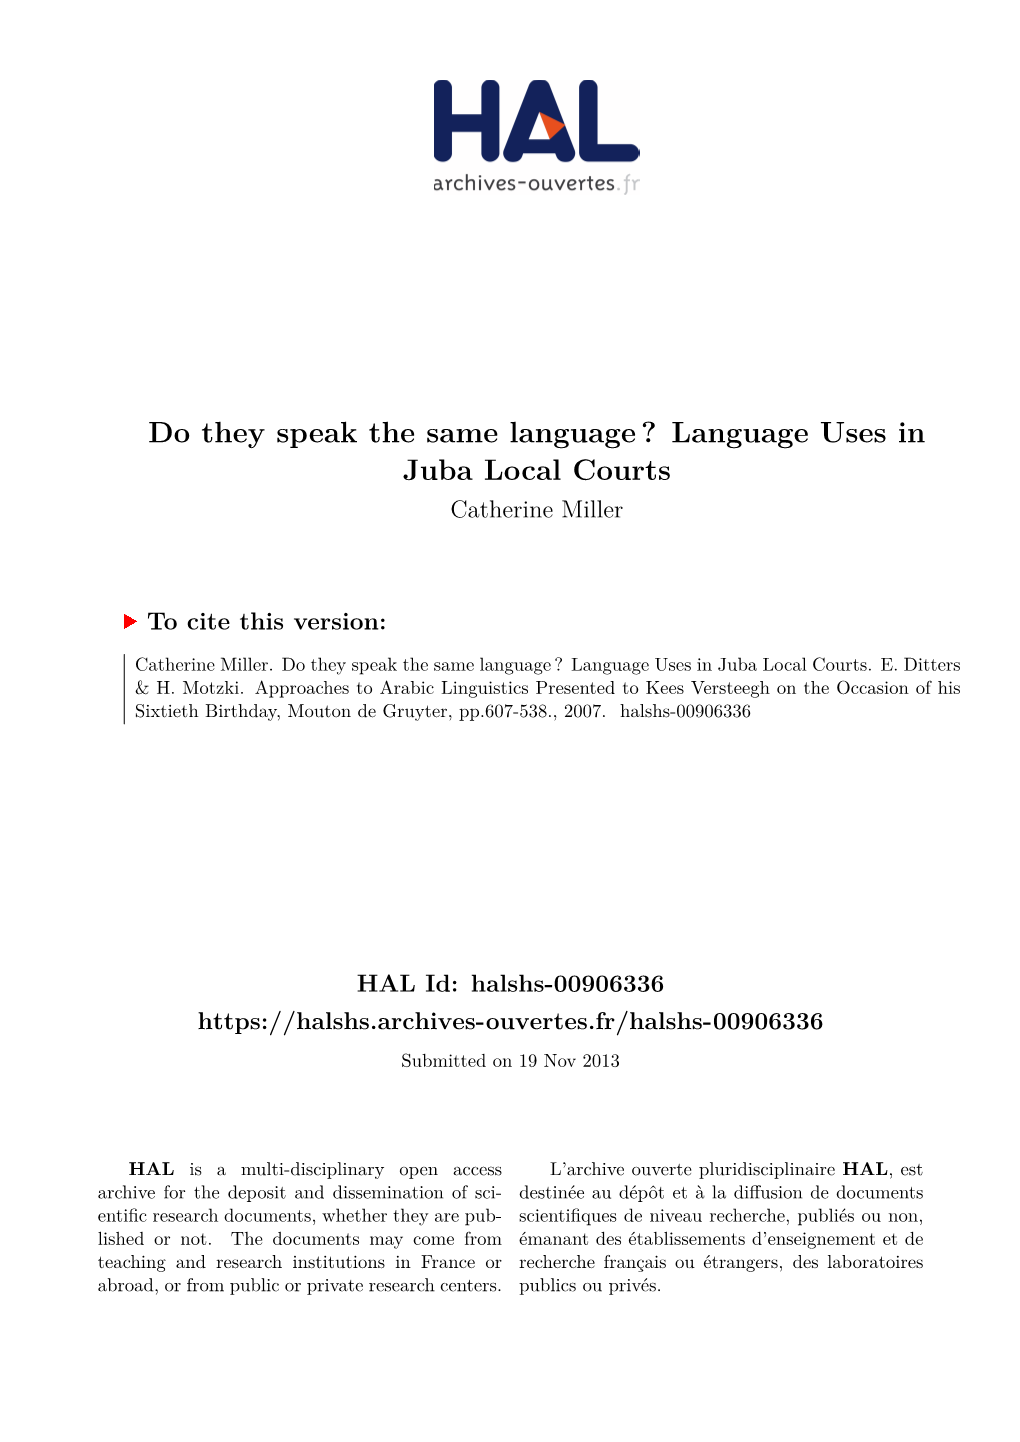 Language Uses in Juba Local Courts Catherine Miller